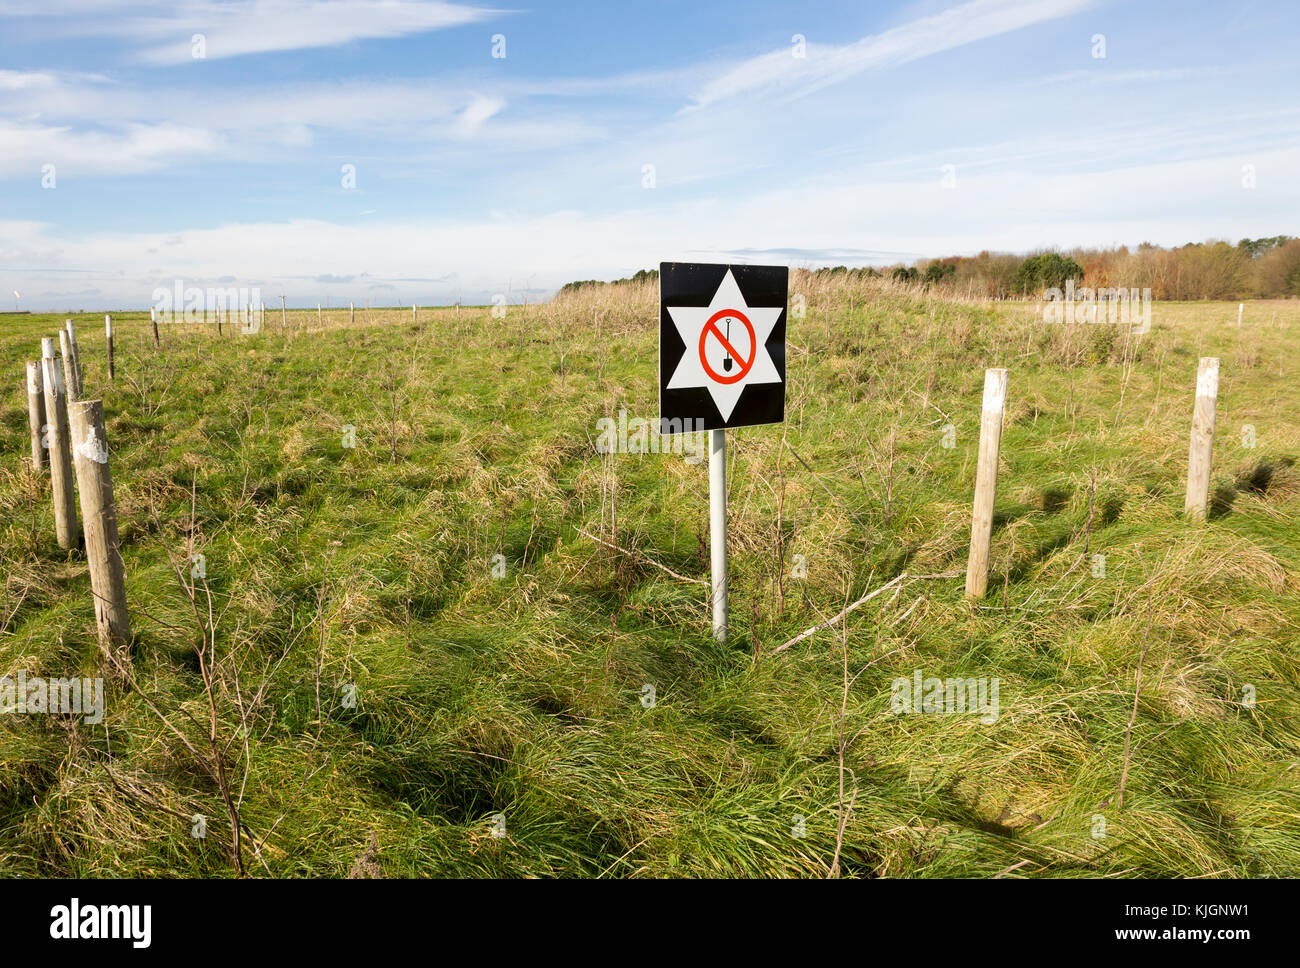 Protective sign warning against digging at an archaeological site on Salisbury Plain, Wiltshire, England, UK Stock Photo